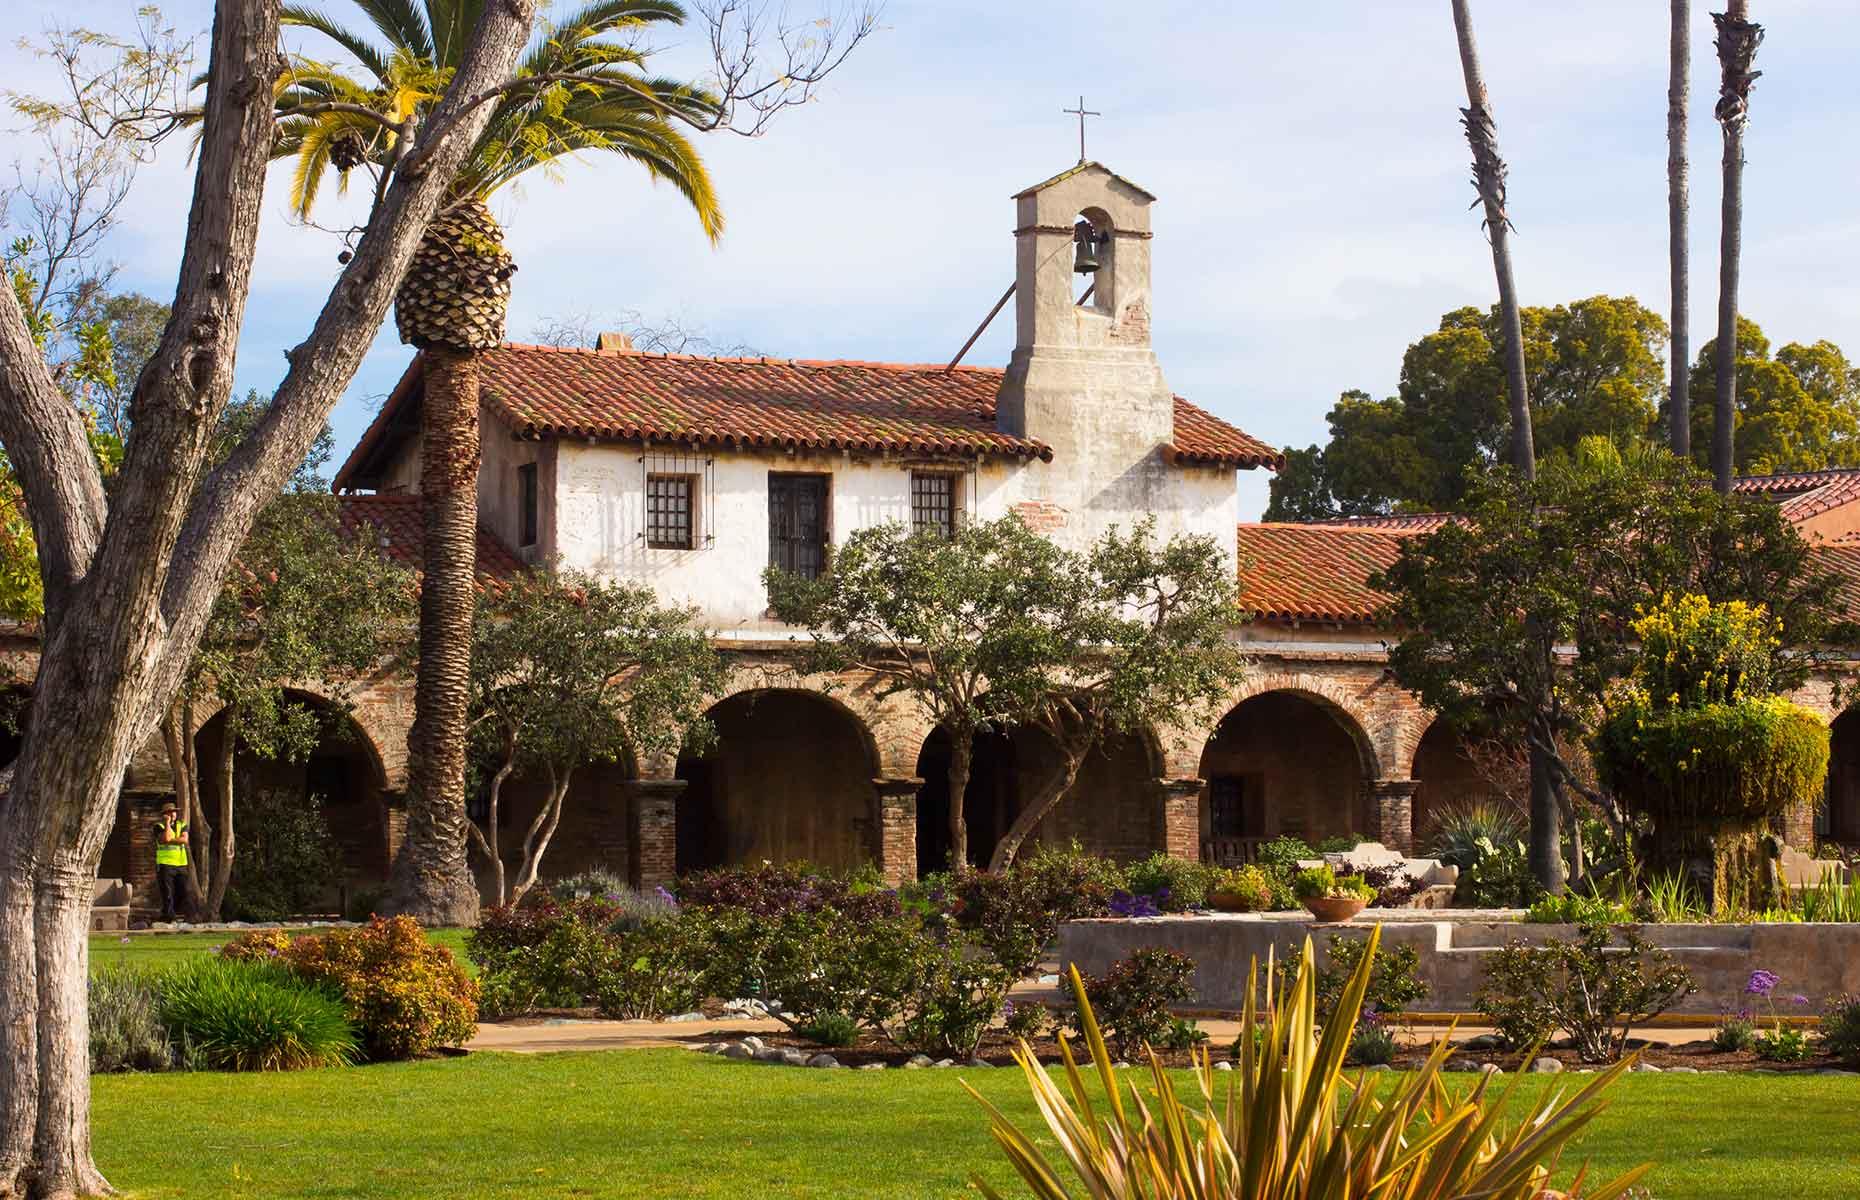 <p>This <a href="https://www.missionsjc.com/">lovely landmark</a> was initially founded in 1776 by a Basque Franciscan missionary as a simple adobe chapel, while the Spanish-style structure that surrounds it (pictured) was completed in 1782. It later served as a private ranch residence before <a href="https://www.insider.com/oldest-building-us-states-2018-4#california-mission-san-juan-capistrano-in-san-juan-capistrano-5">returning to the Catholic church</a> in the late 19th century. Today it features museum rooms and exhibits, while in the gardens you can explore the original 1776 chapel on an audio tour. </p>